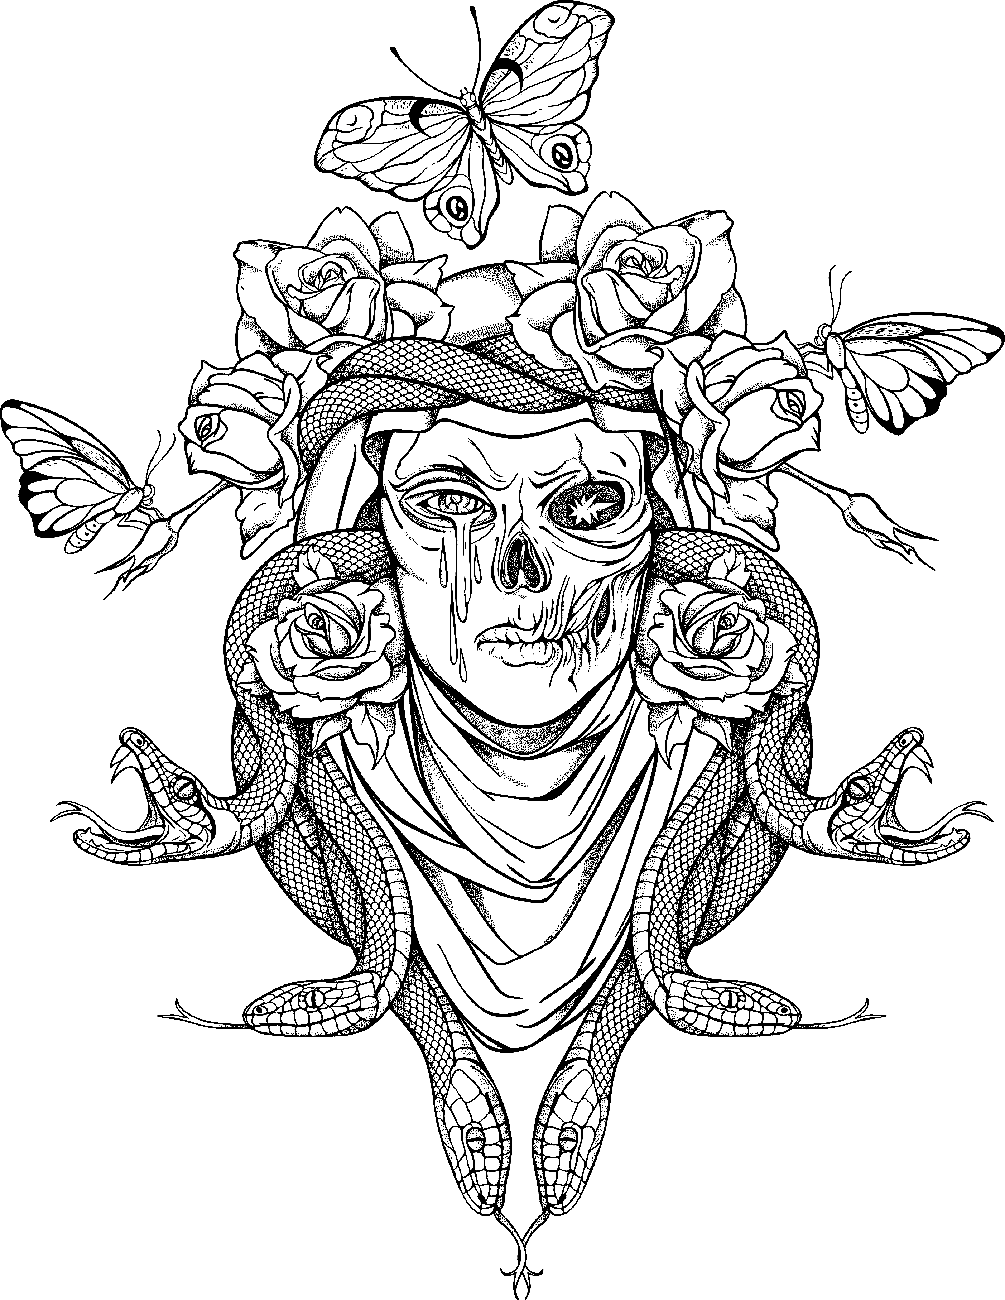 Skull, Snakes, Butterflies and Roses Coloring Page